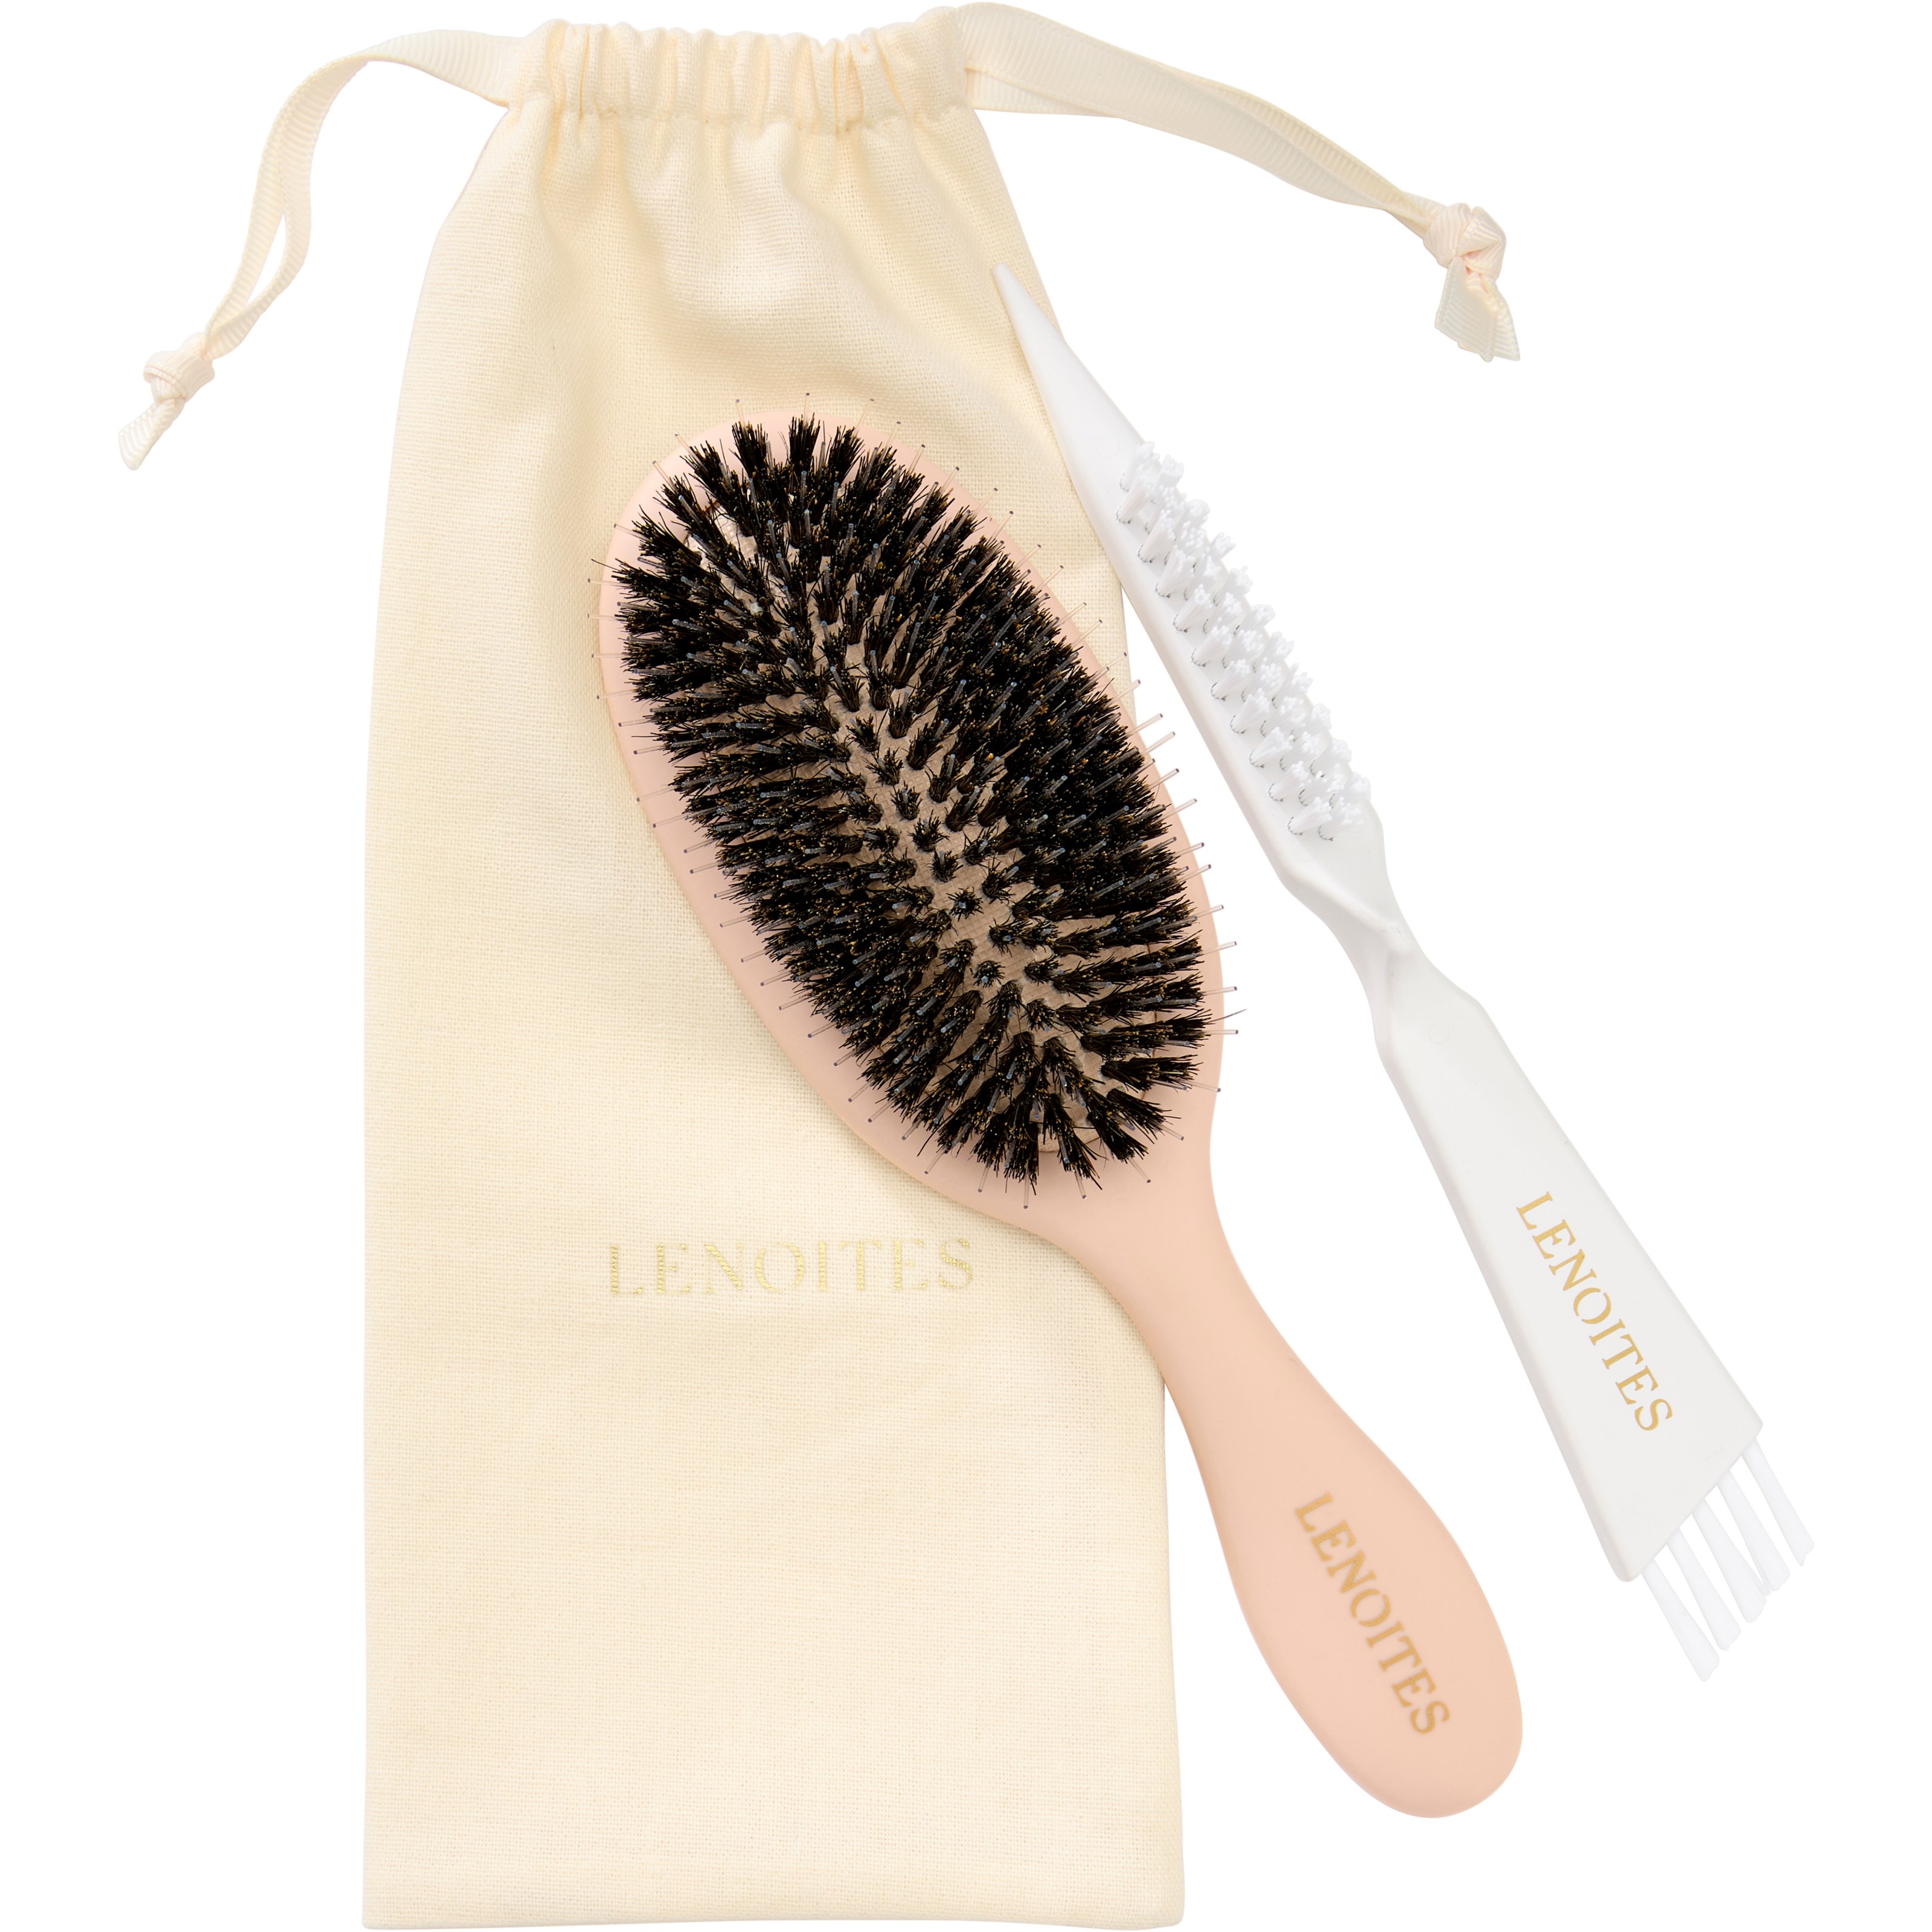 Läs mer om Lenoites Hair Brush Wild Boar with pouch and cleaner tool